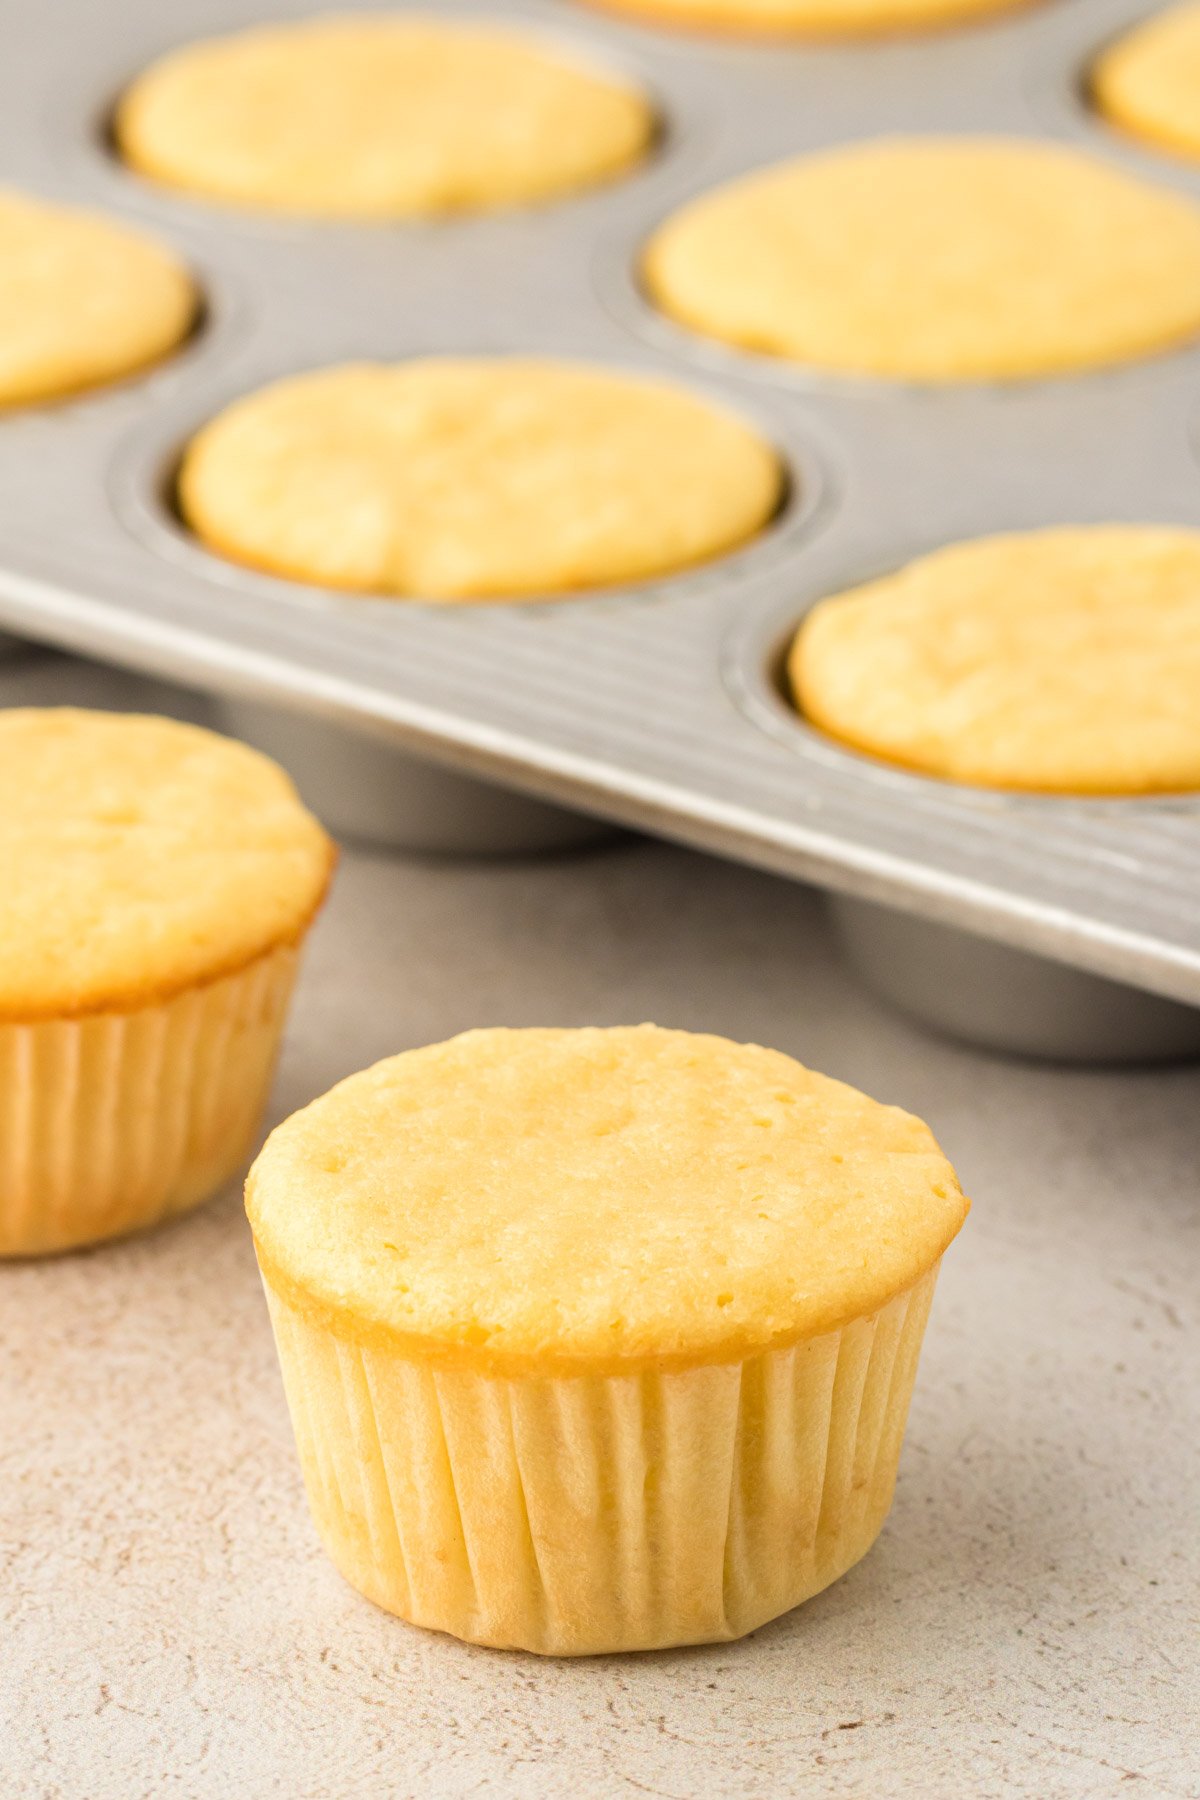 Yellow cupcakes in and near a pan.